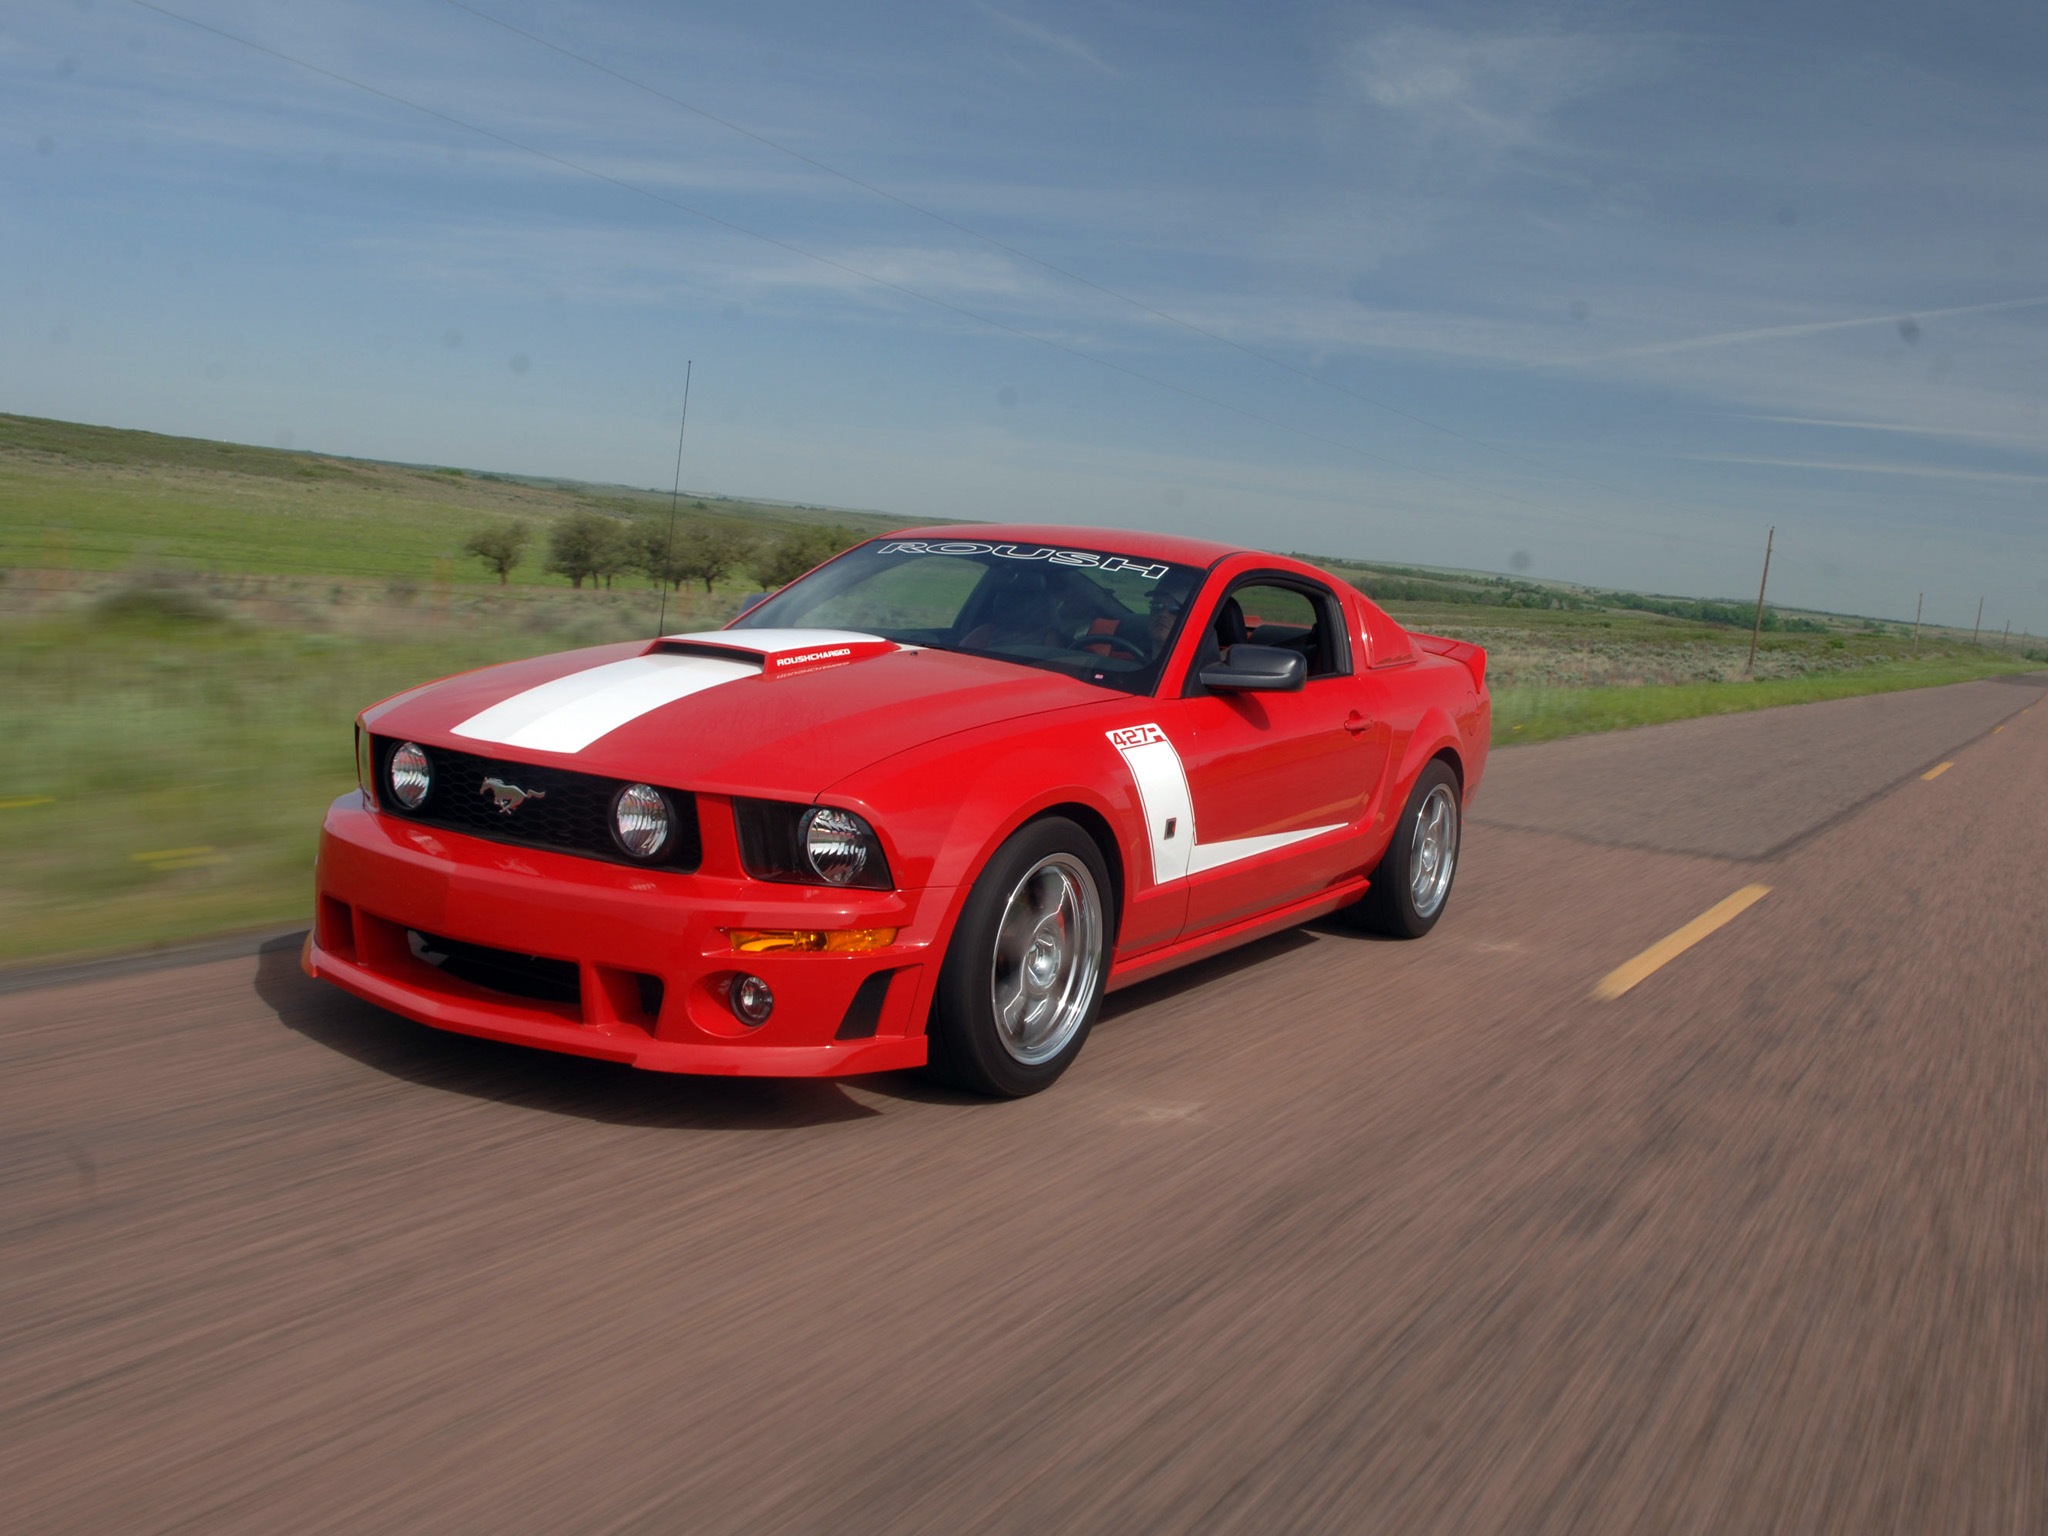 2009, Roush, Ford, Mustang, 427r, Muscle, Tuning Wallpaper